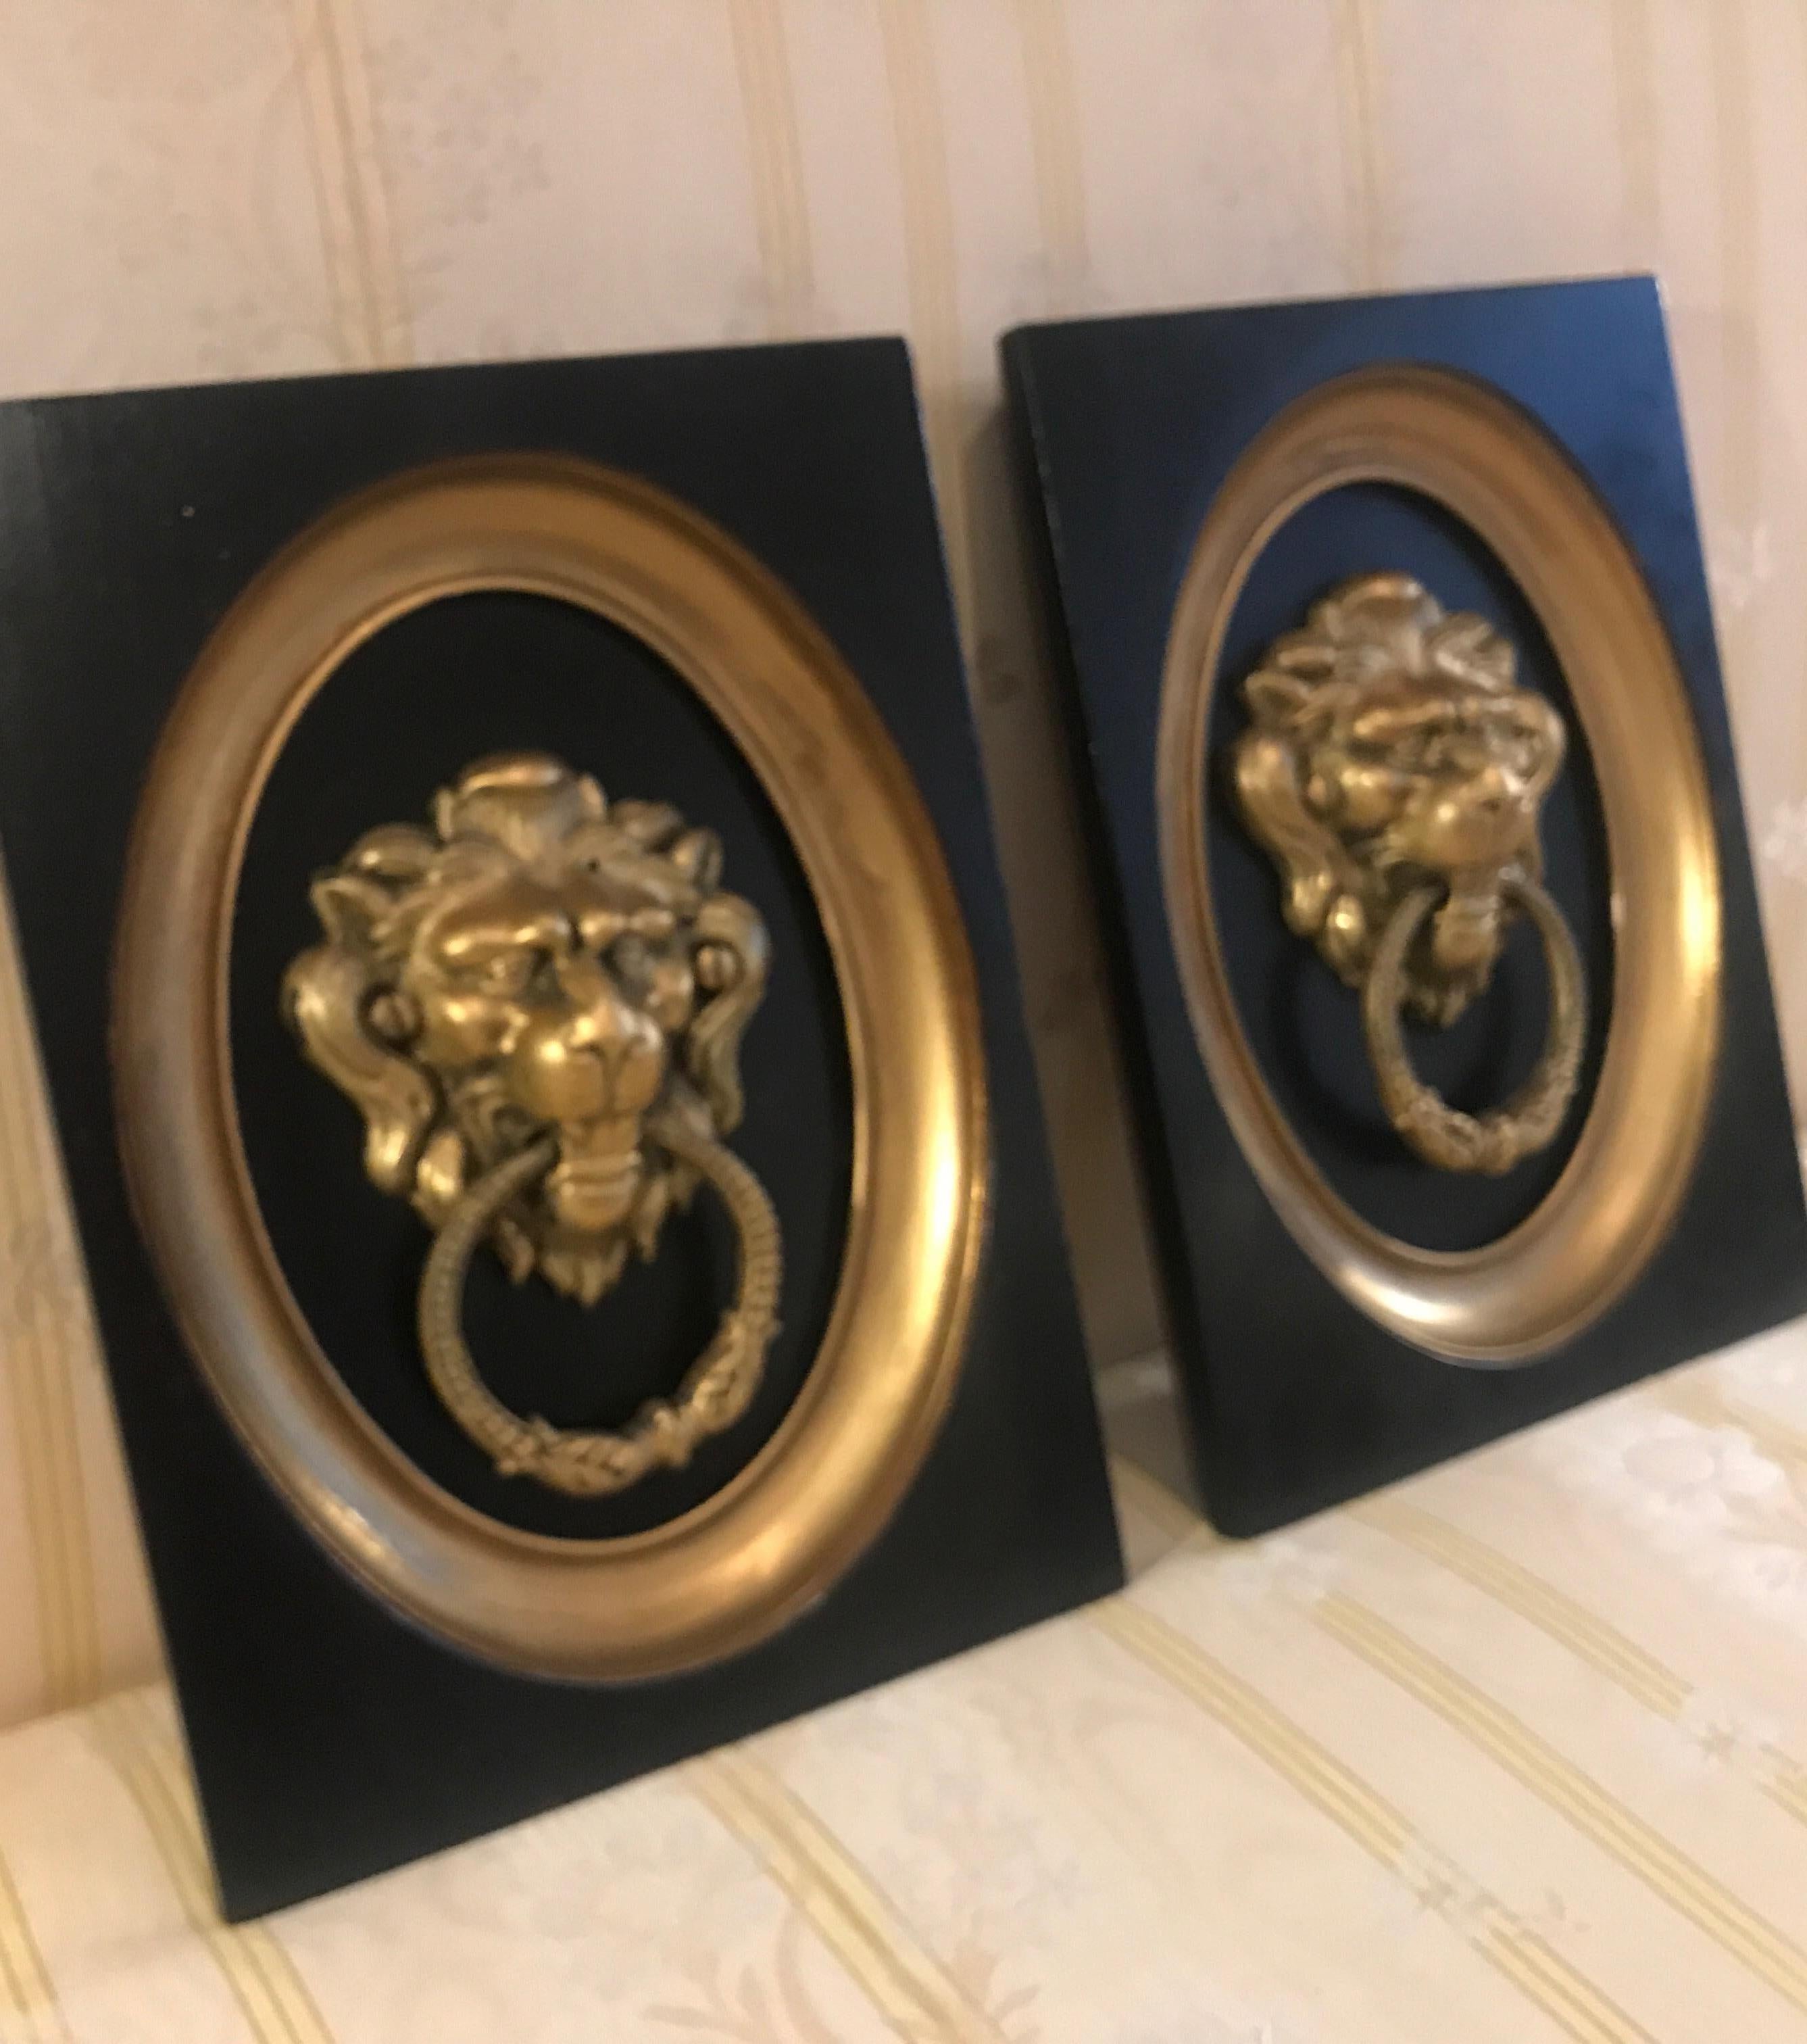 A pair of 19th century cast gilt bronze lion door knockers mounted and framed. The gilt bronze lions with rings mounted on a black backing with an ebonized and gilt frame.